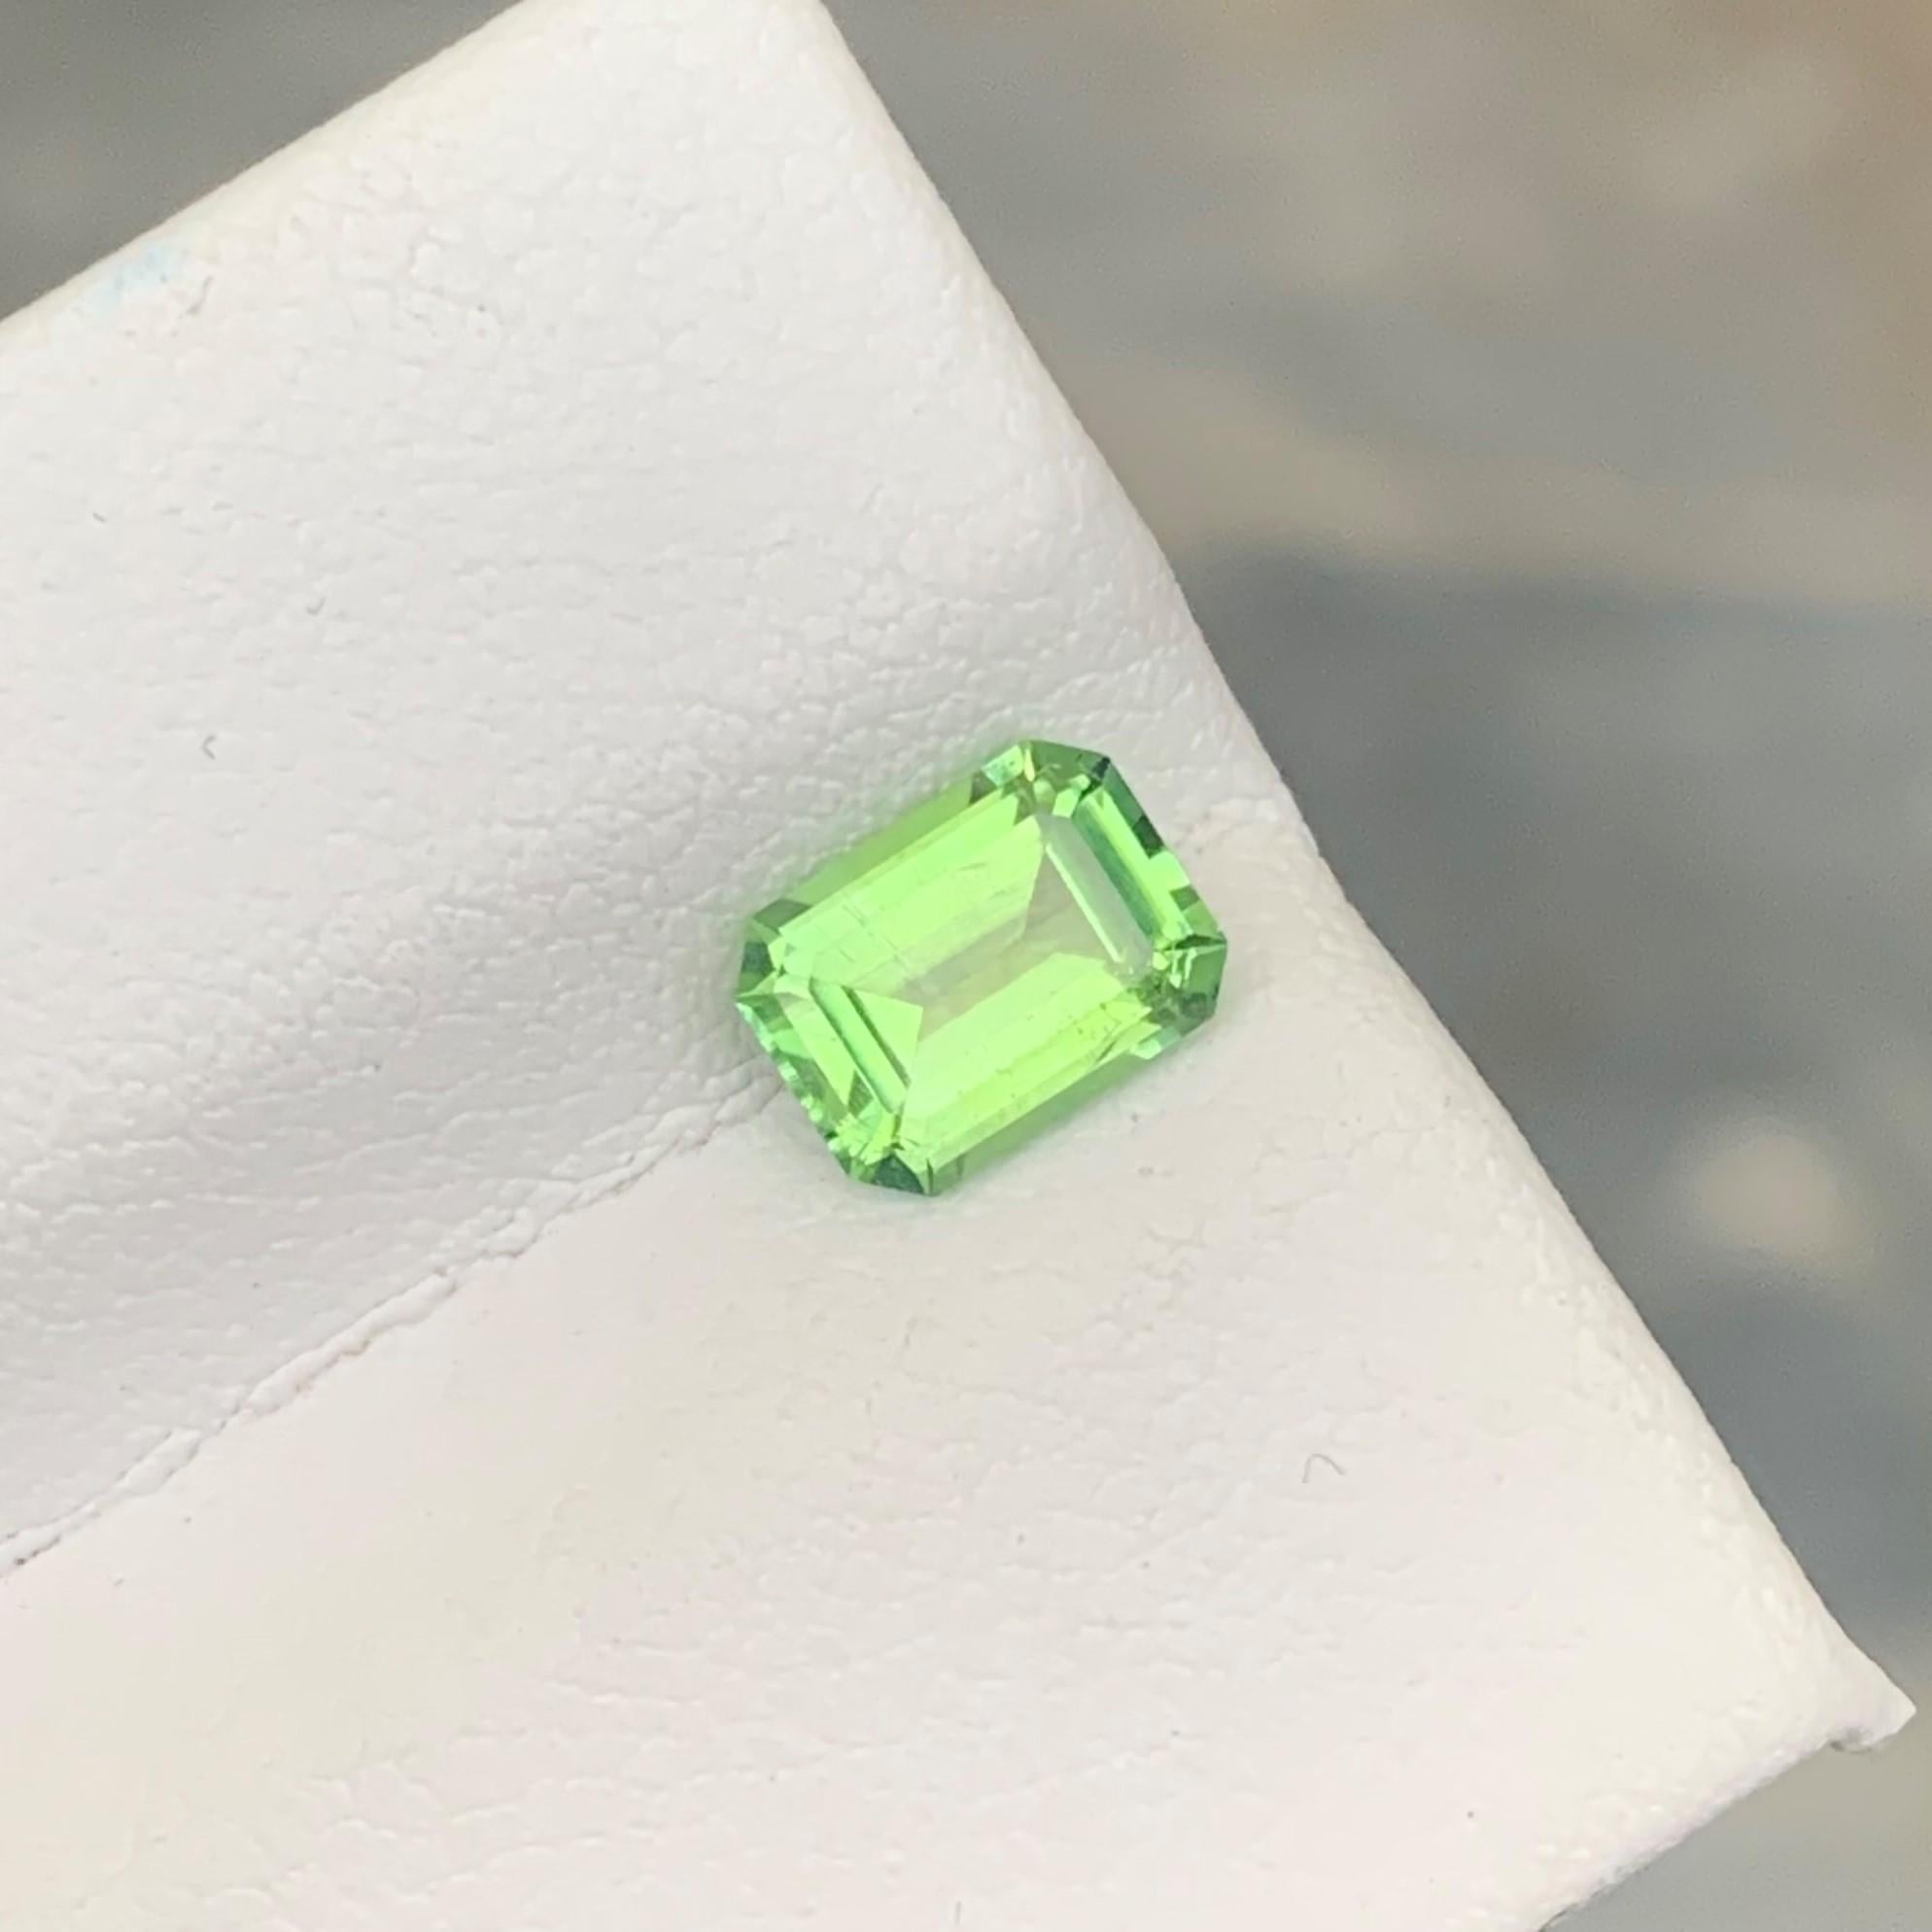 Gemstone Type : Tourmaline
Weight : 0.95 Carats
Dimensions : 7x5.3x3.5 Mm
Origin : Kunar Afghanistan
Clarity : Eye Clean
Shape: Emerald
Color: Green
Certificate: On Demand
Basically, mint tourmalines are tourmalines with pastel hues of light green